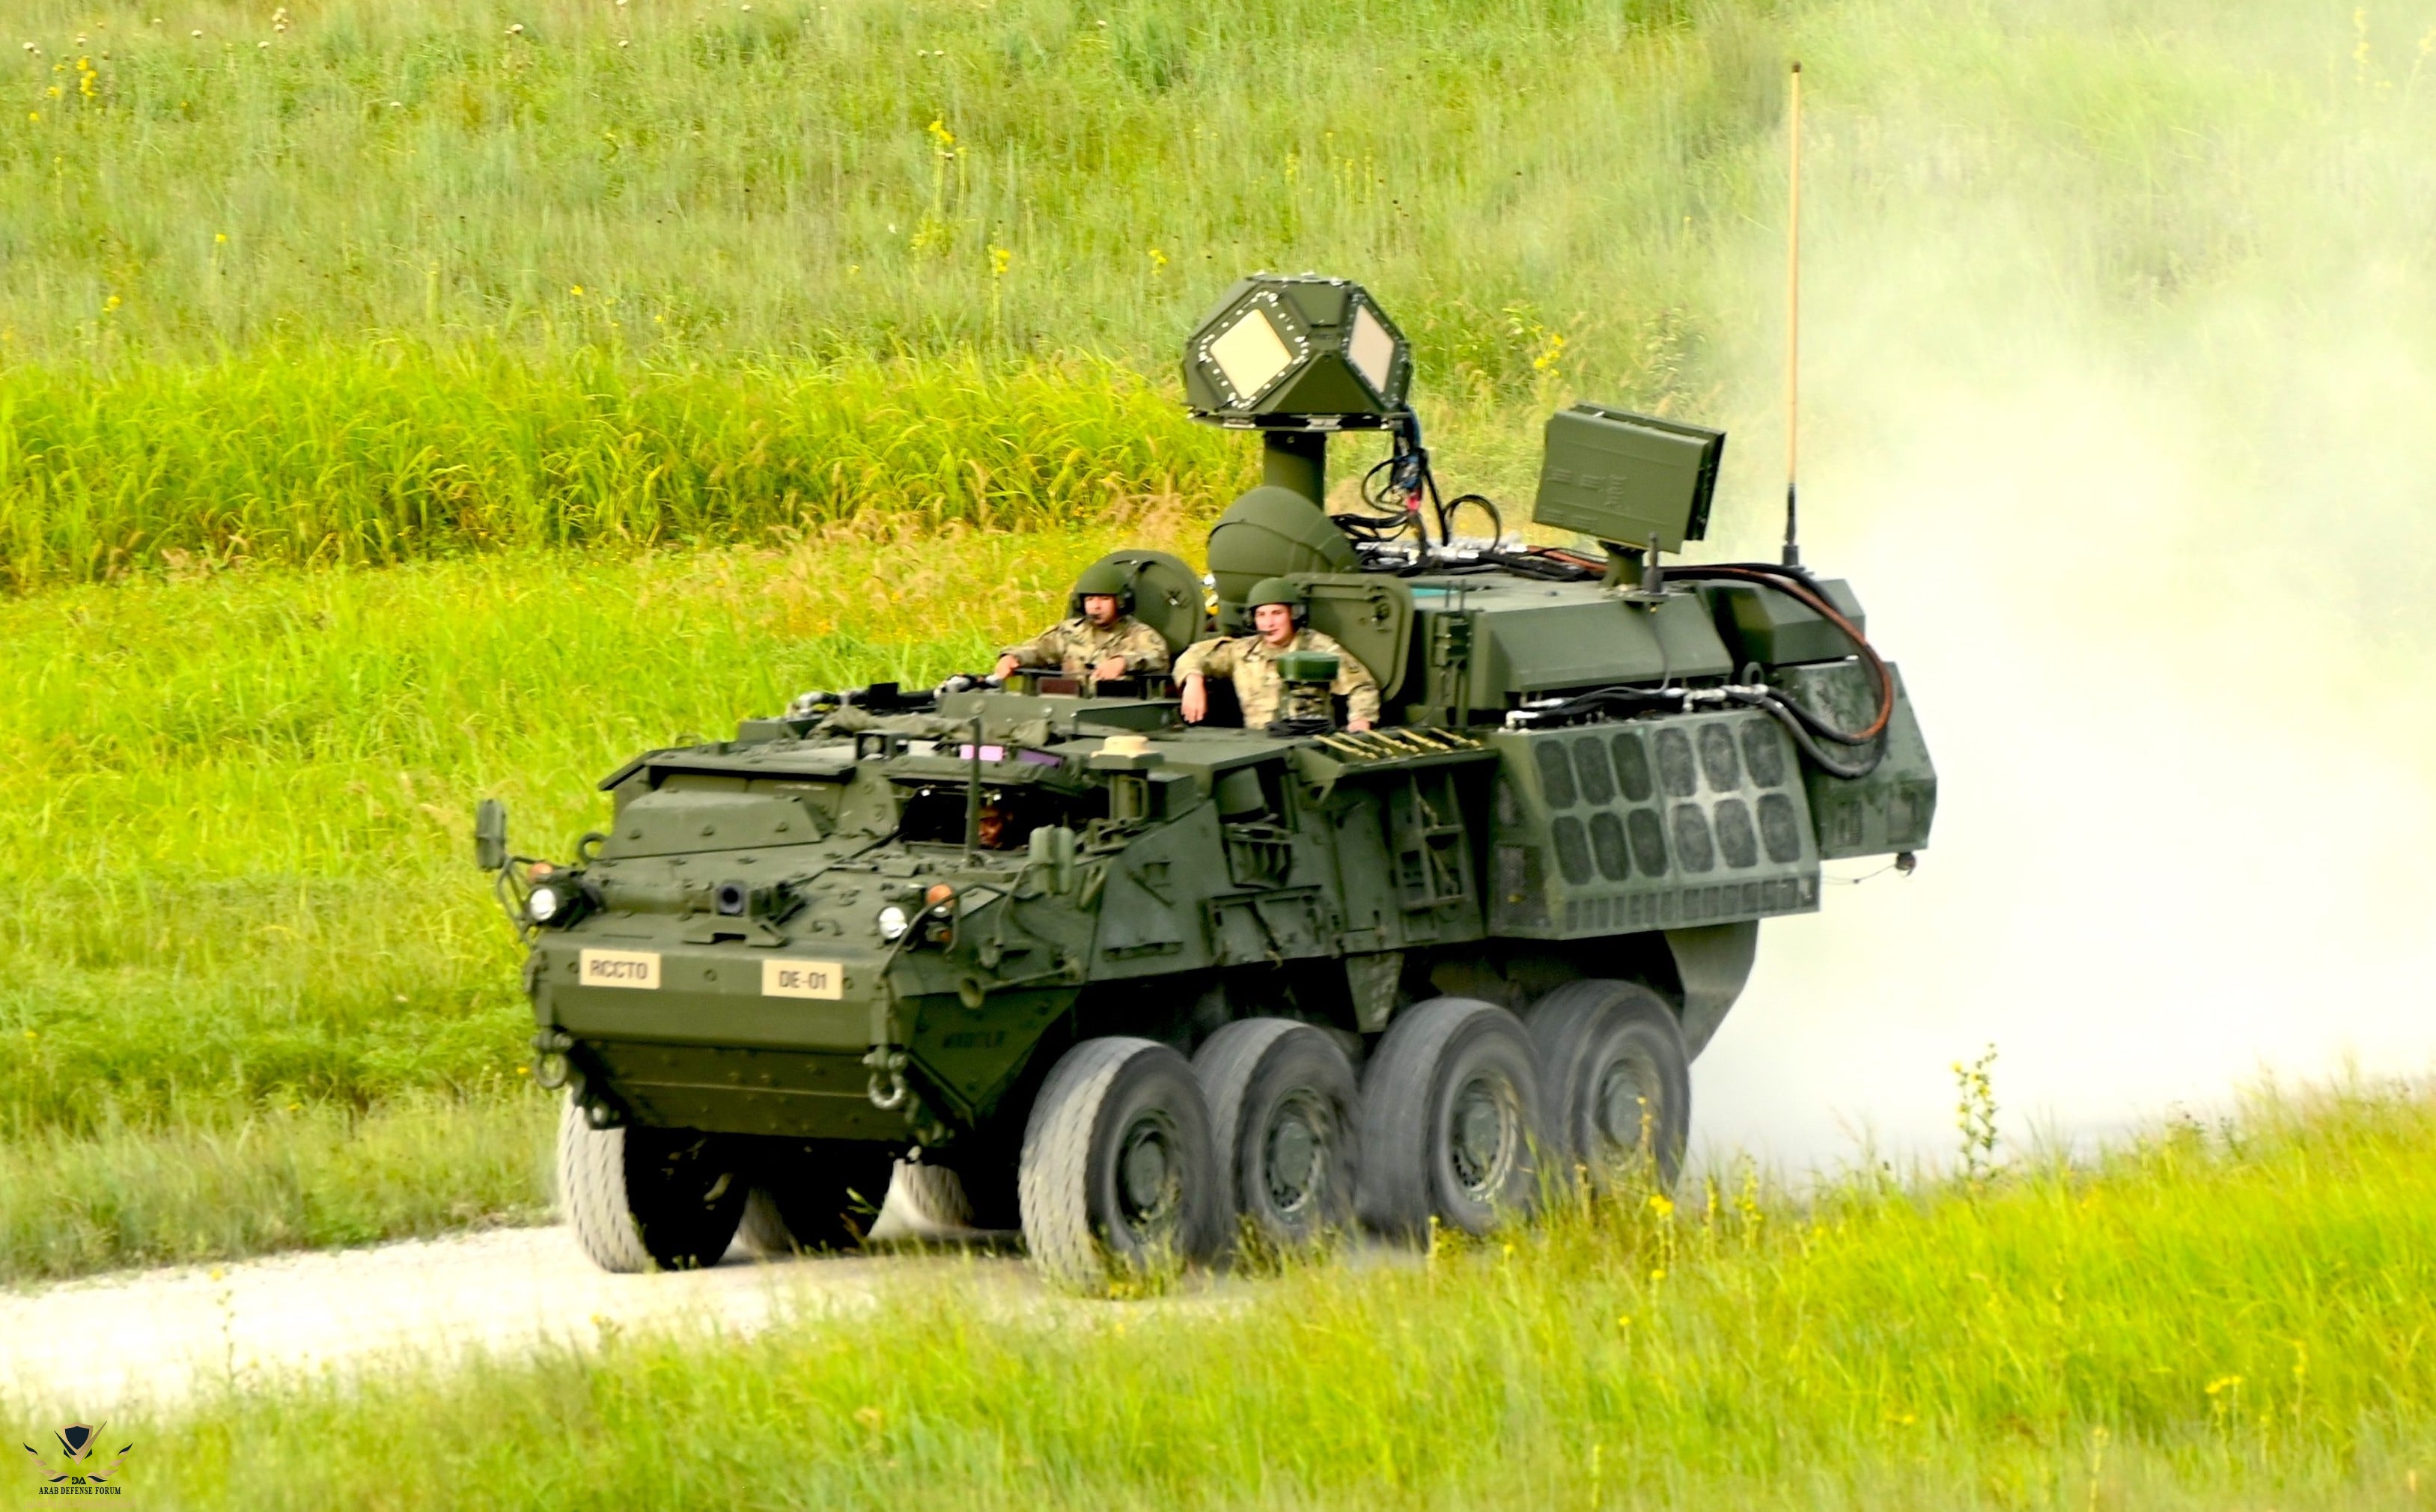 us-army-soldiers-riding-the-new-de-m-shorad-vehicle-v0-er162hs2d26b1.jpg